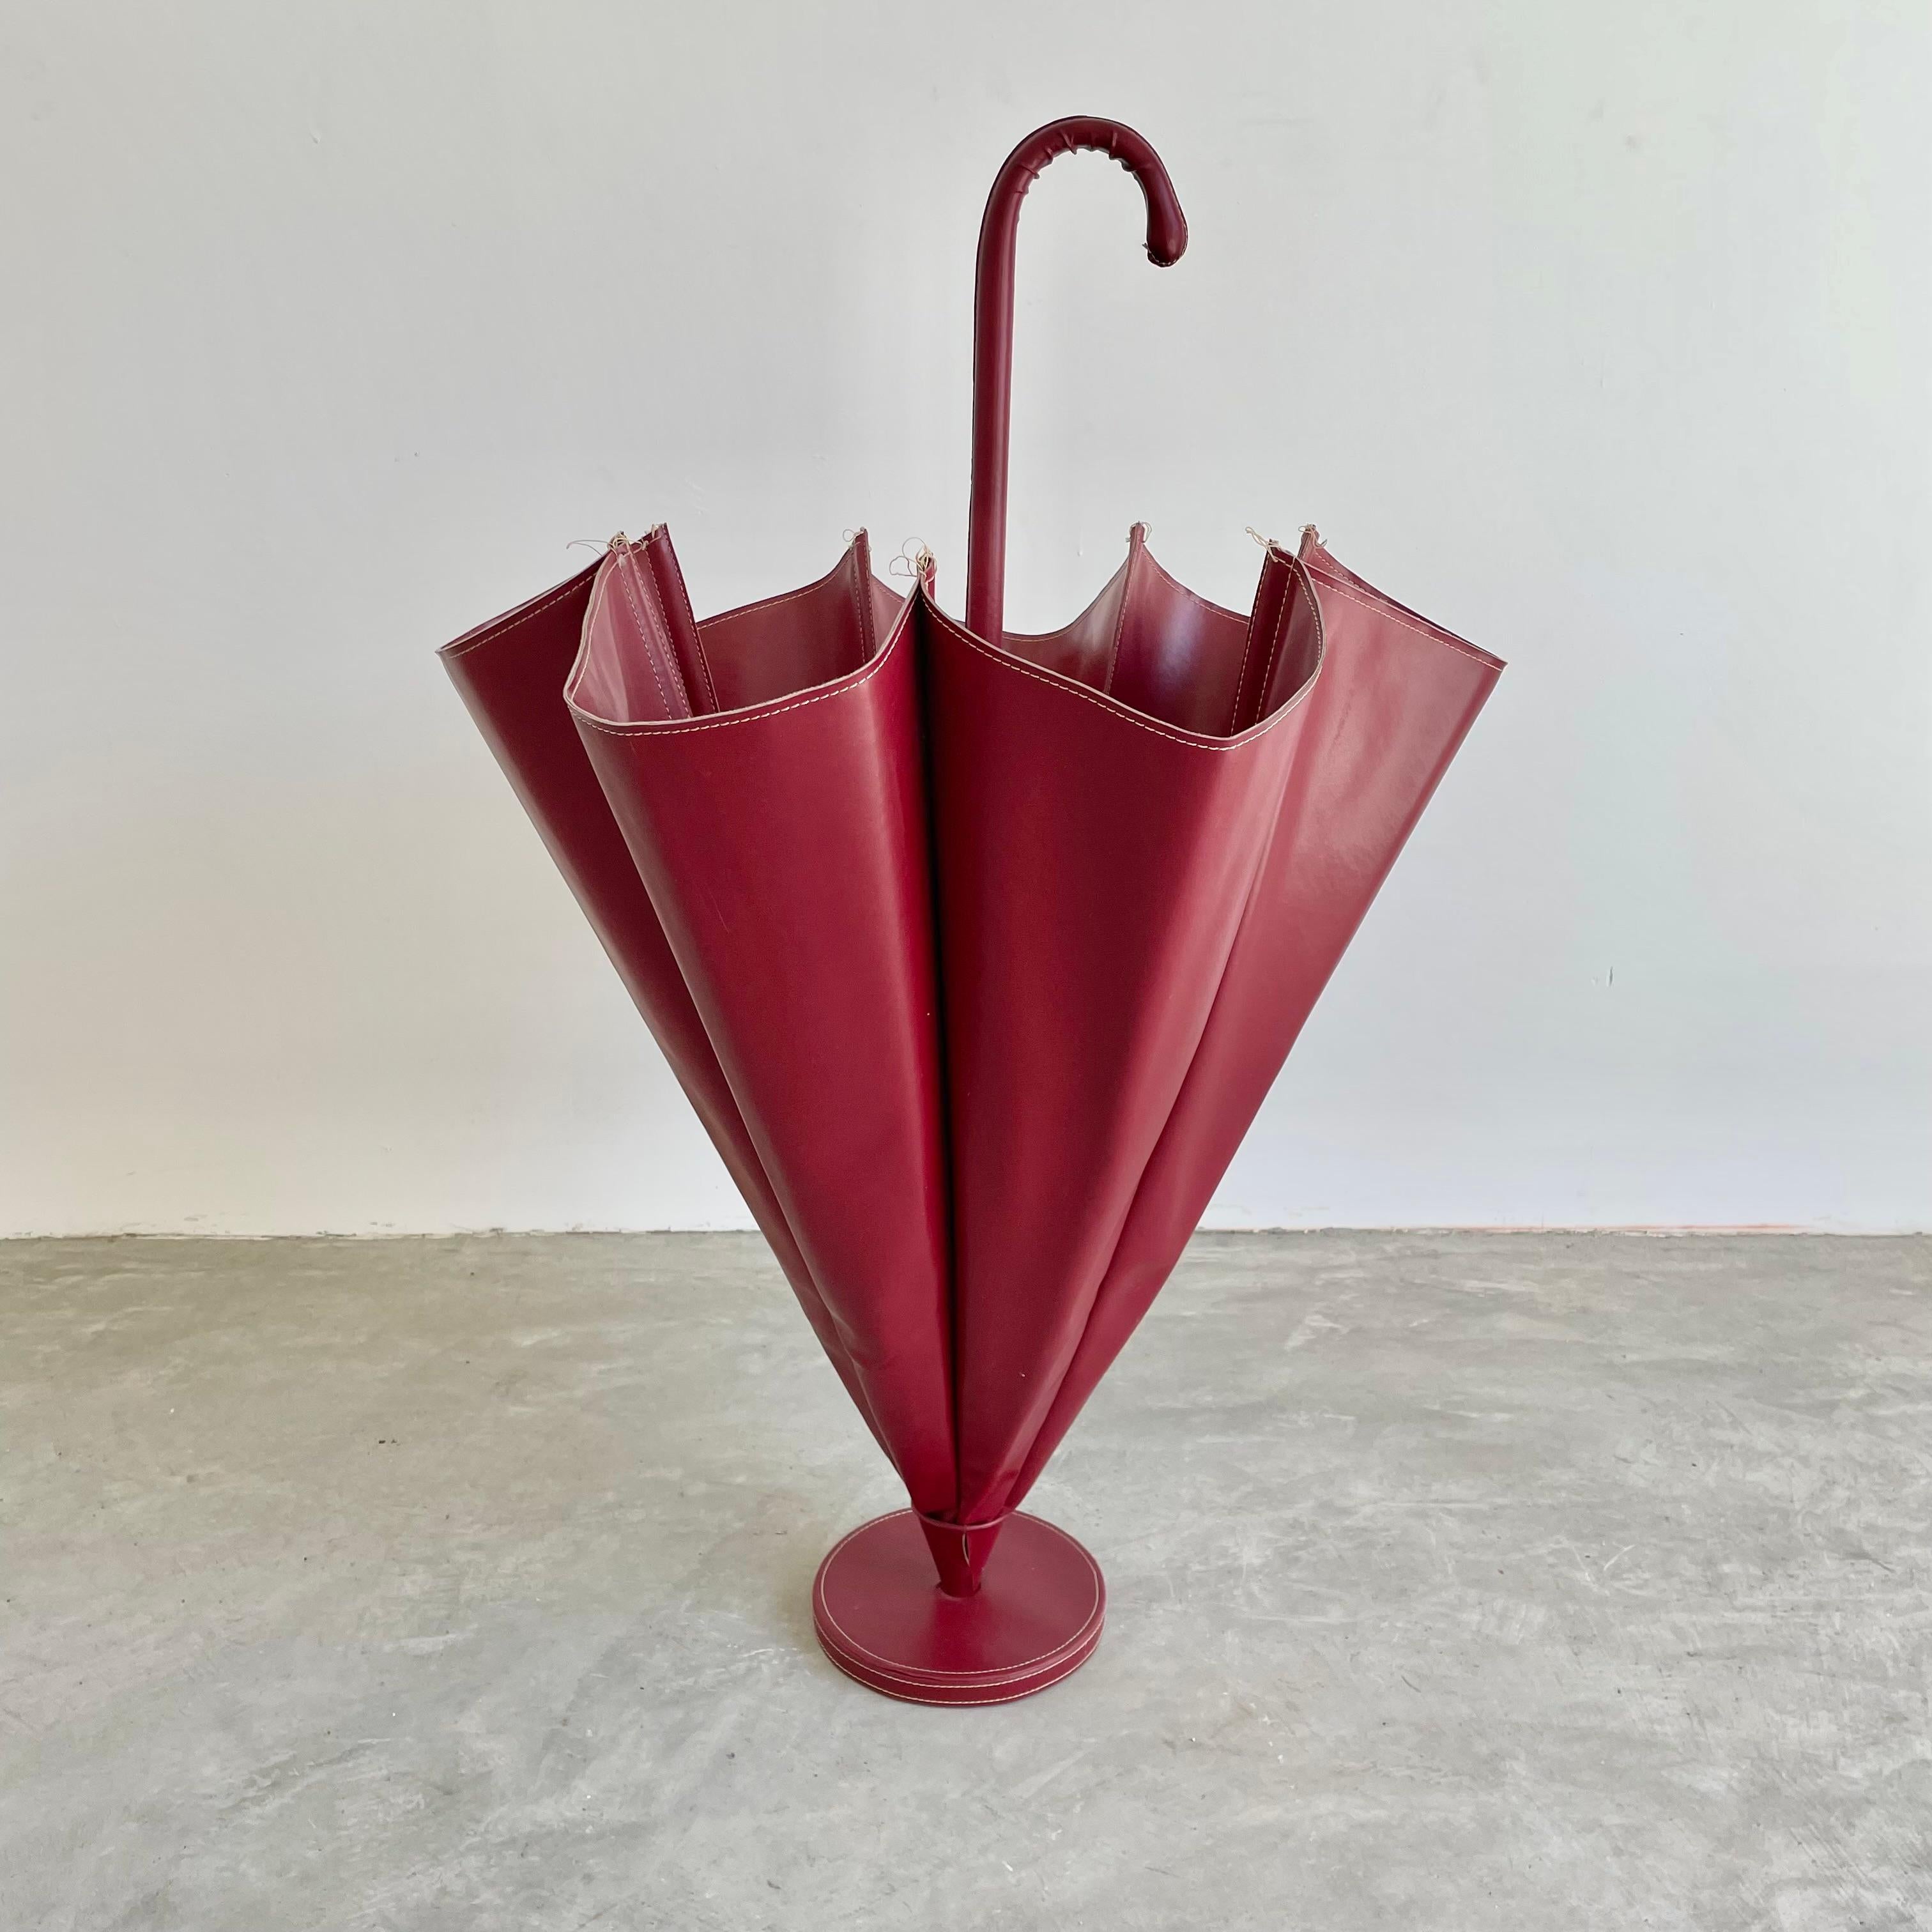 Stunning umbrella stand in the style of Jacques Adnet. Red Skai material with Adnet style contrast stitching. Styled in the shape of an upside down, open umbrella. Completely wrapped in Skai. 6 removable metal cups sit at the bottom of each fold to